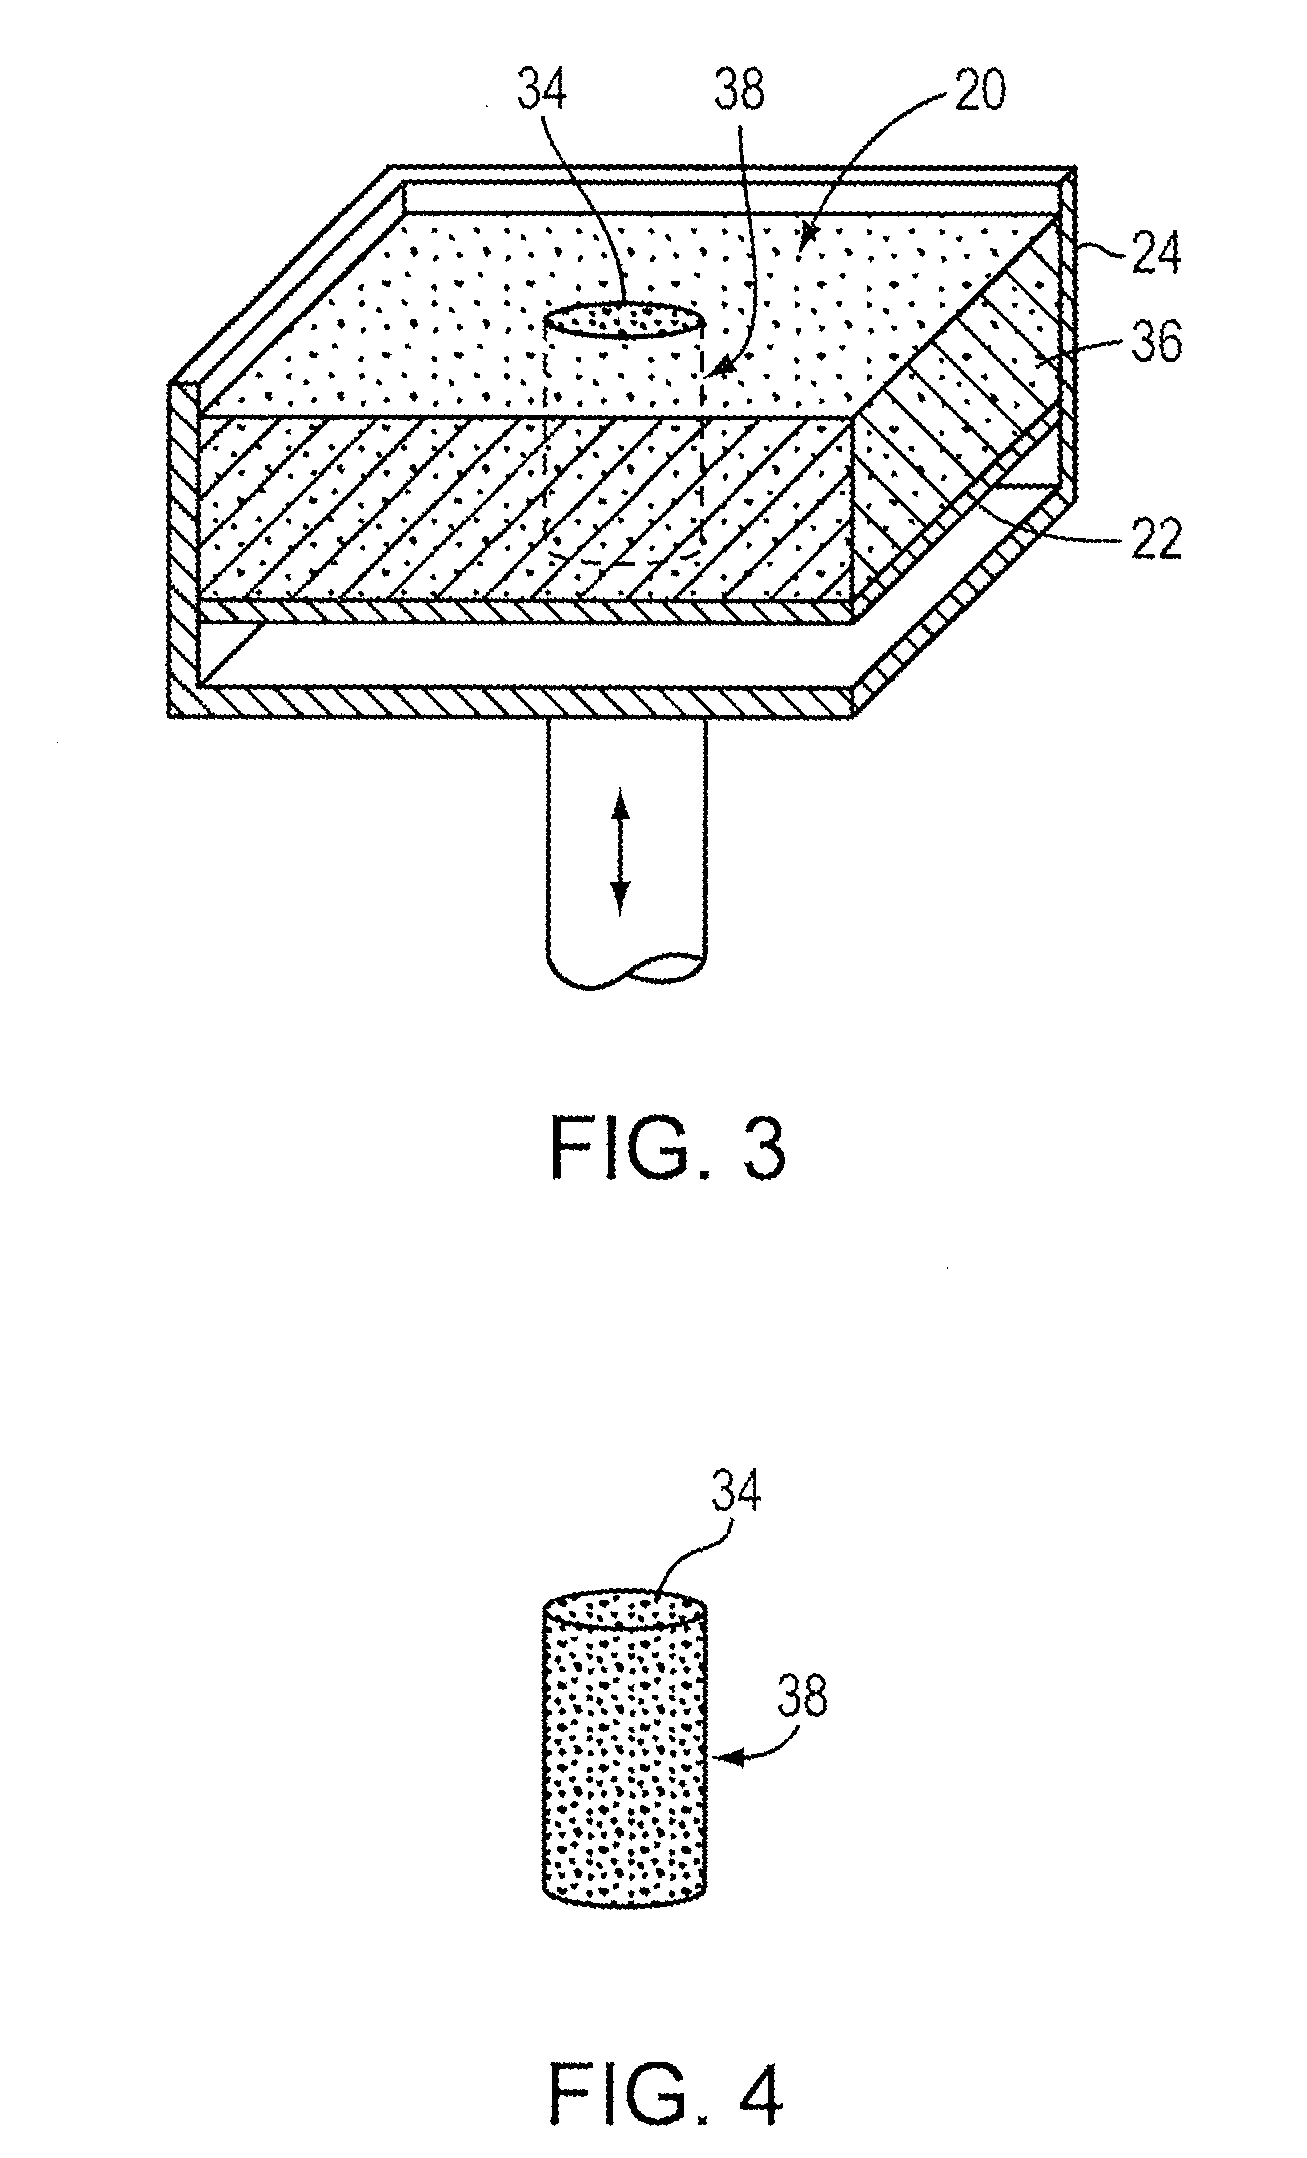 Three-Dimensional Printing Material System With Improved Color, Article Performance, and Ease of Use